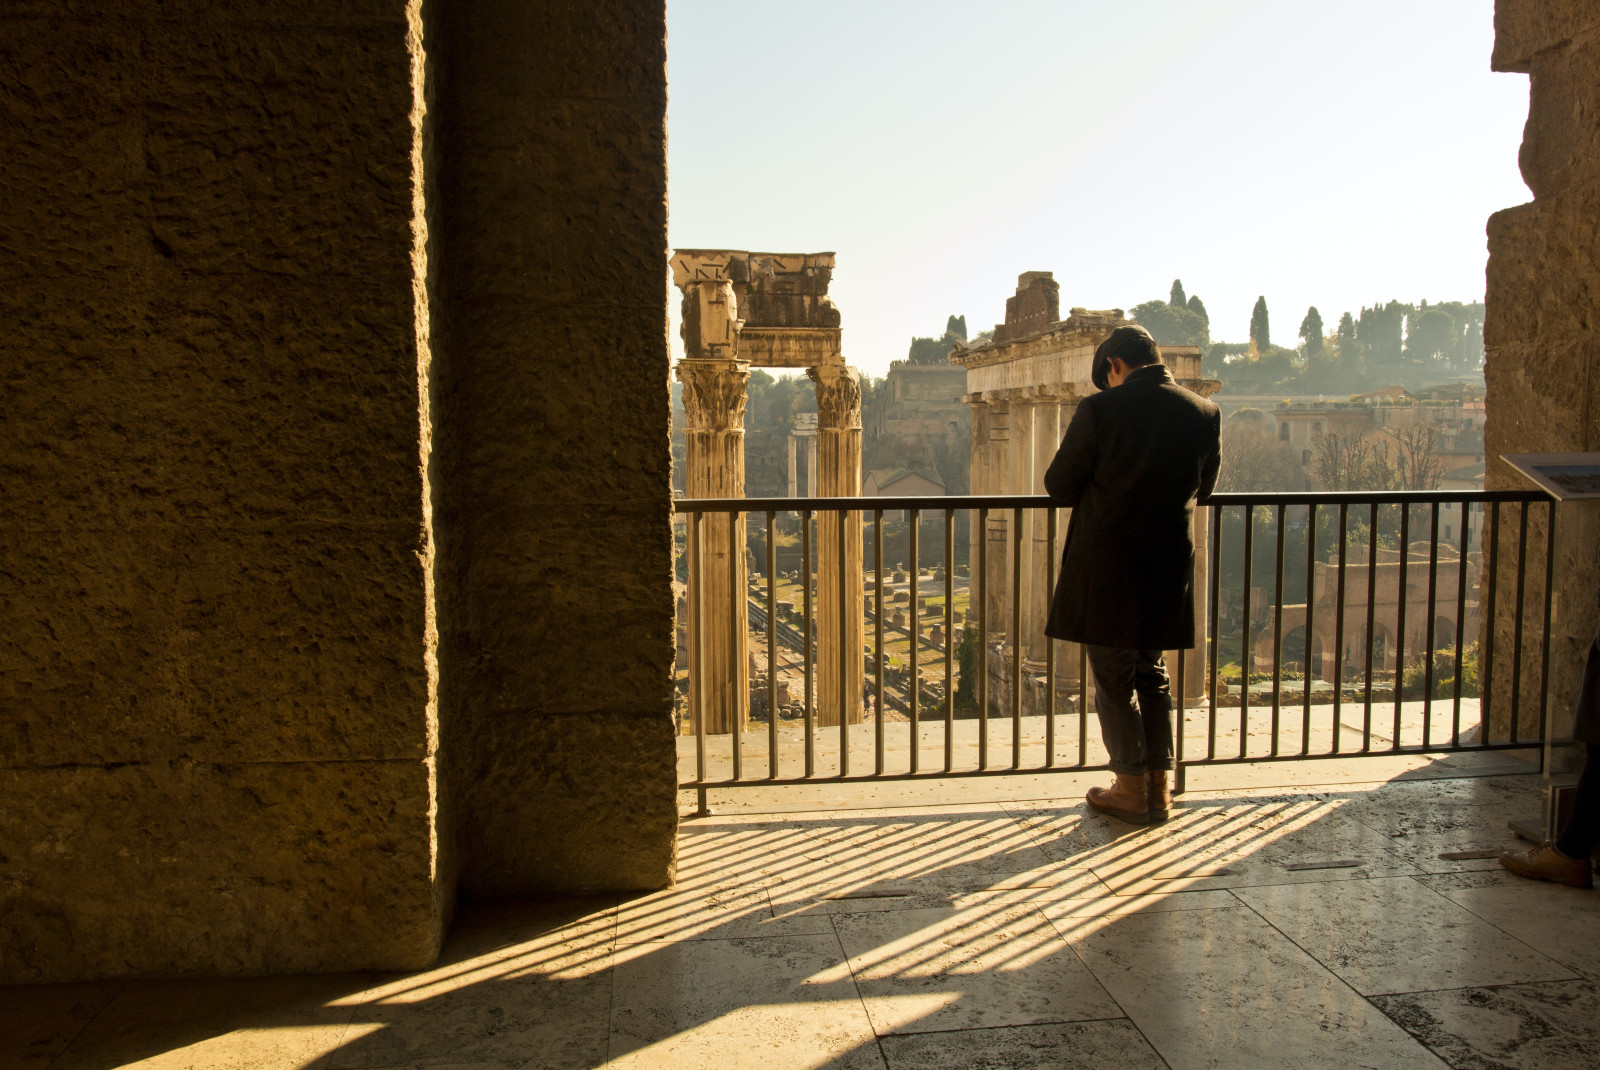 man standing on balcony overlooking ancient structures